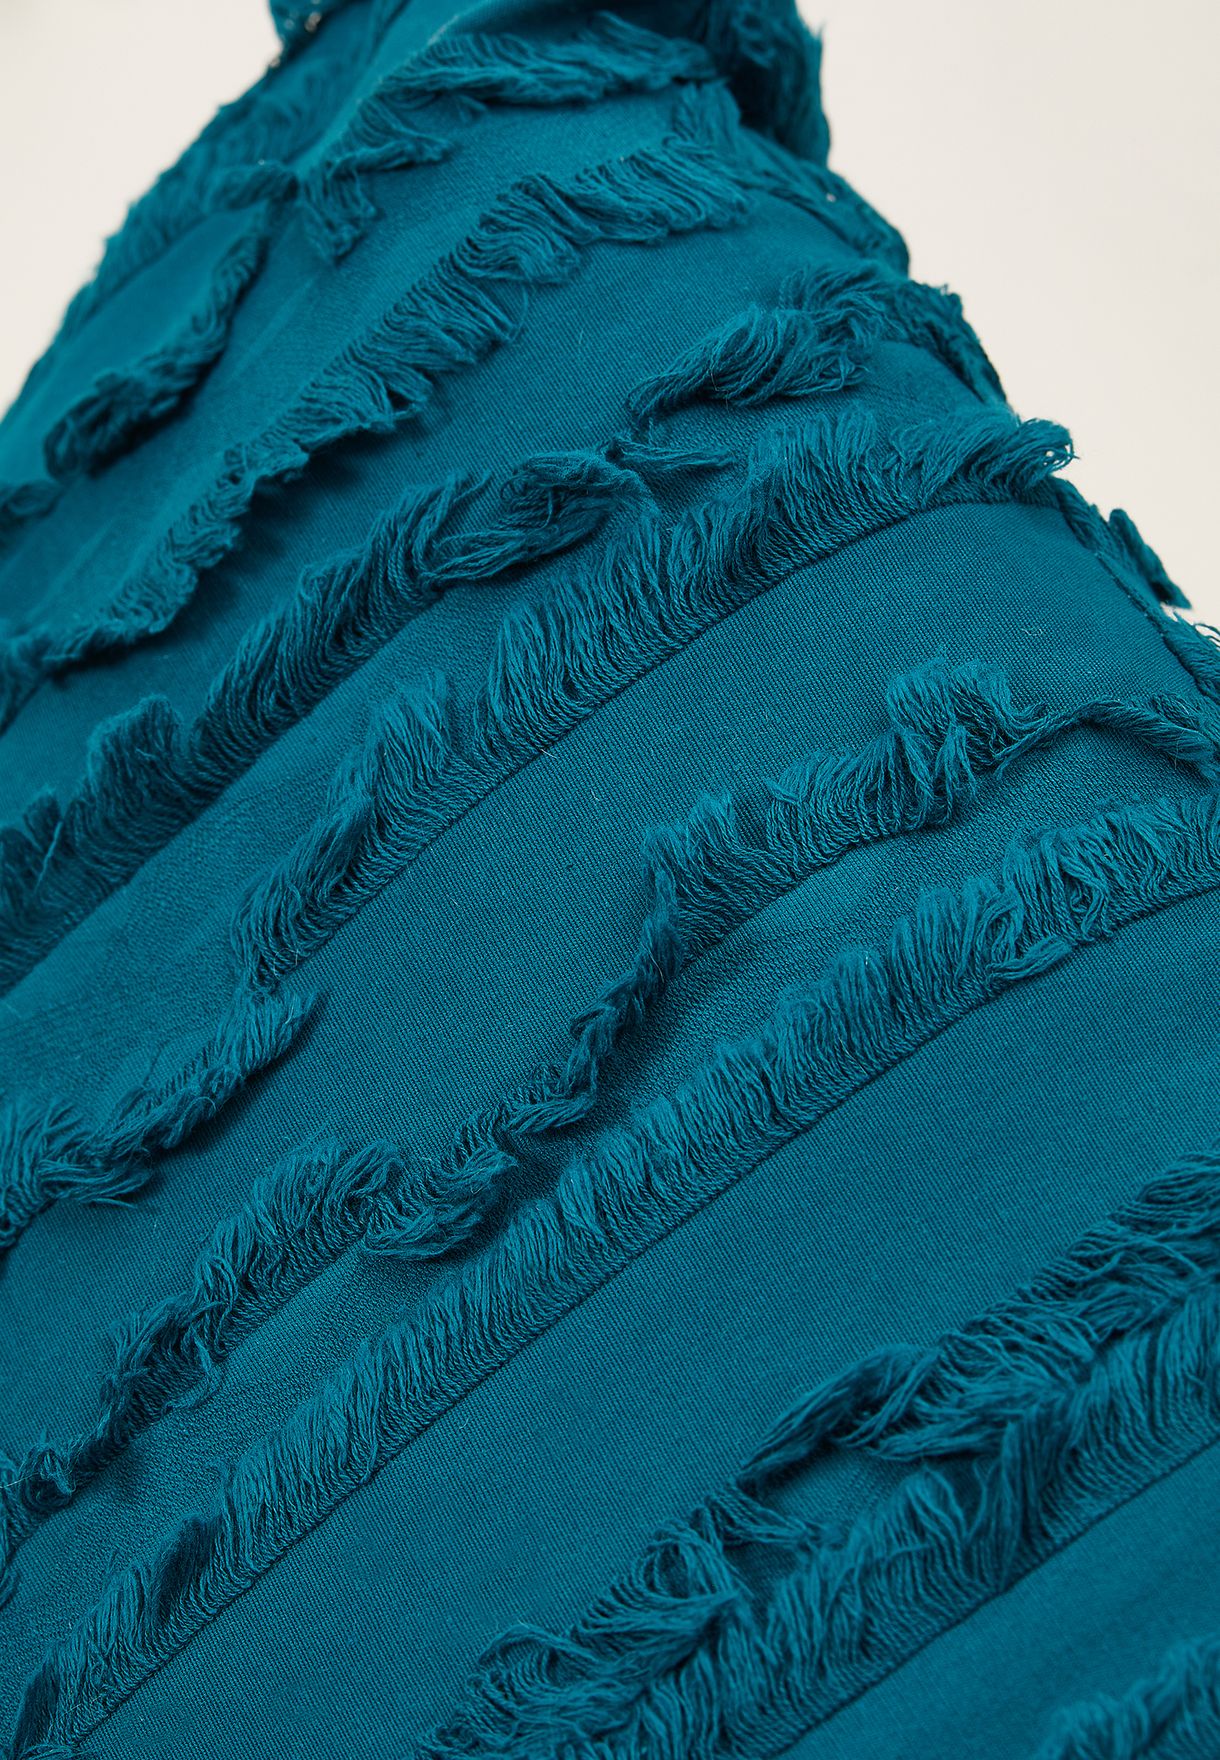 Teal Fringe Cushion With Insert